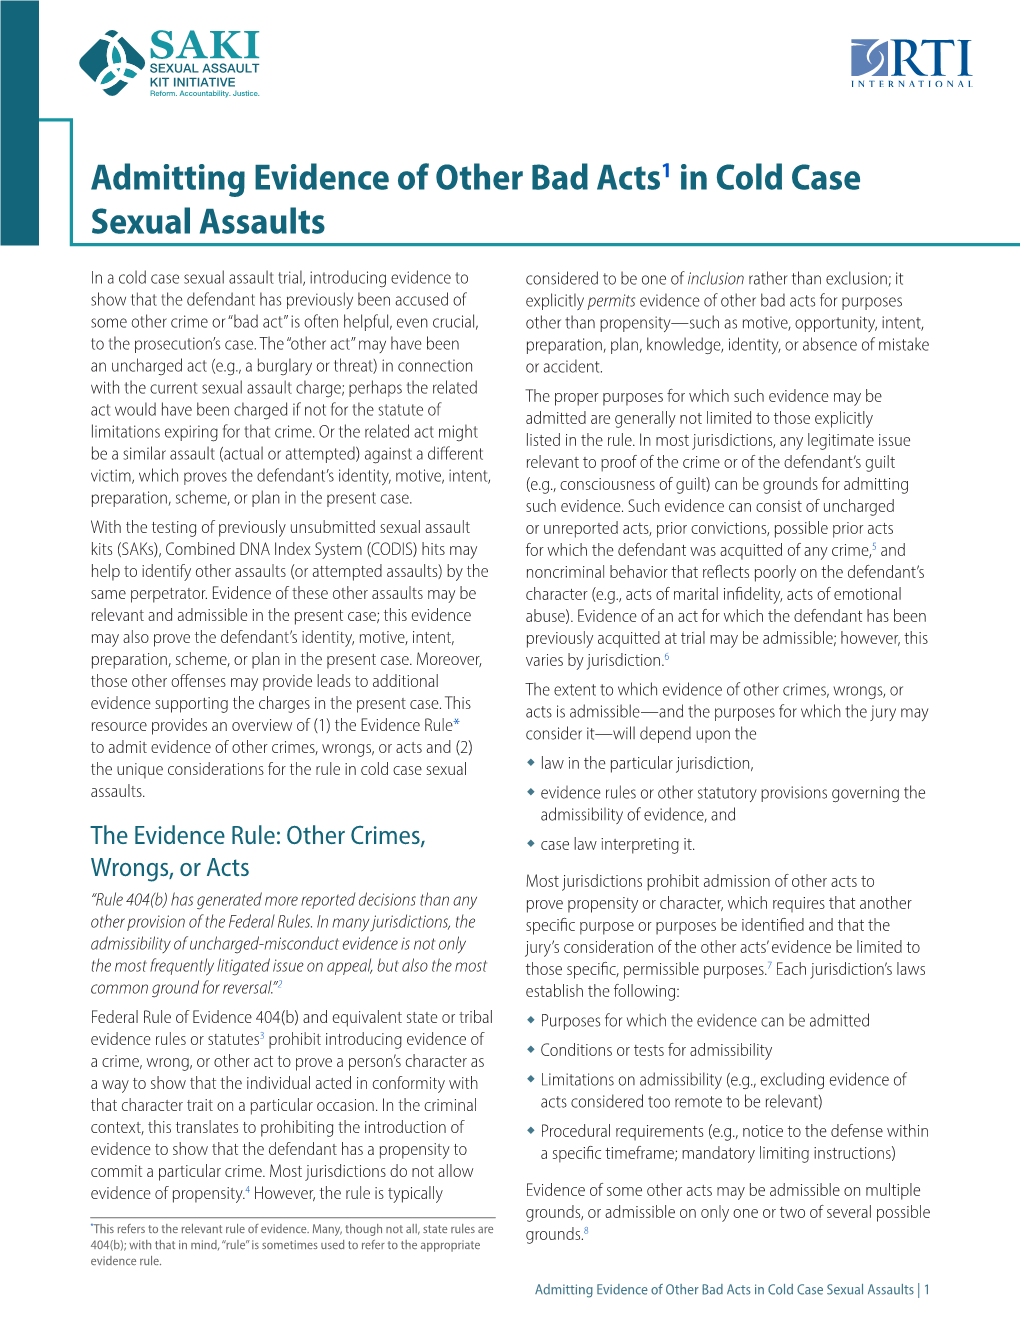 VIEW the DOCUMENT Admitting Evidence of Other Bad Acts in Cold Case Sexual Assaults